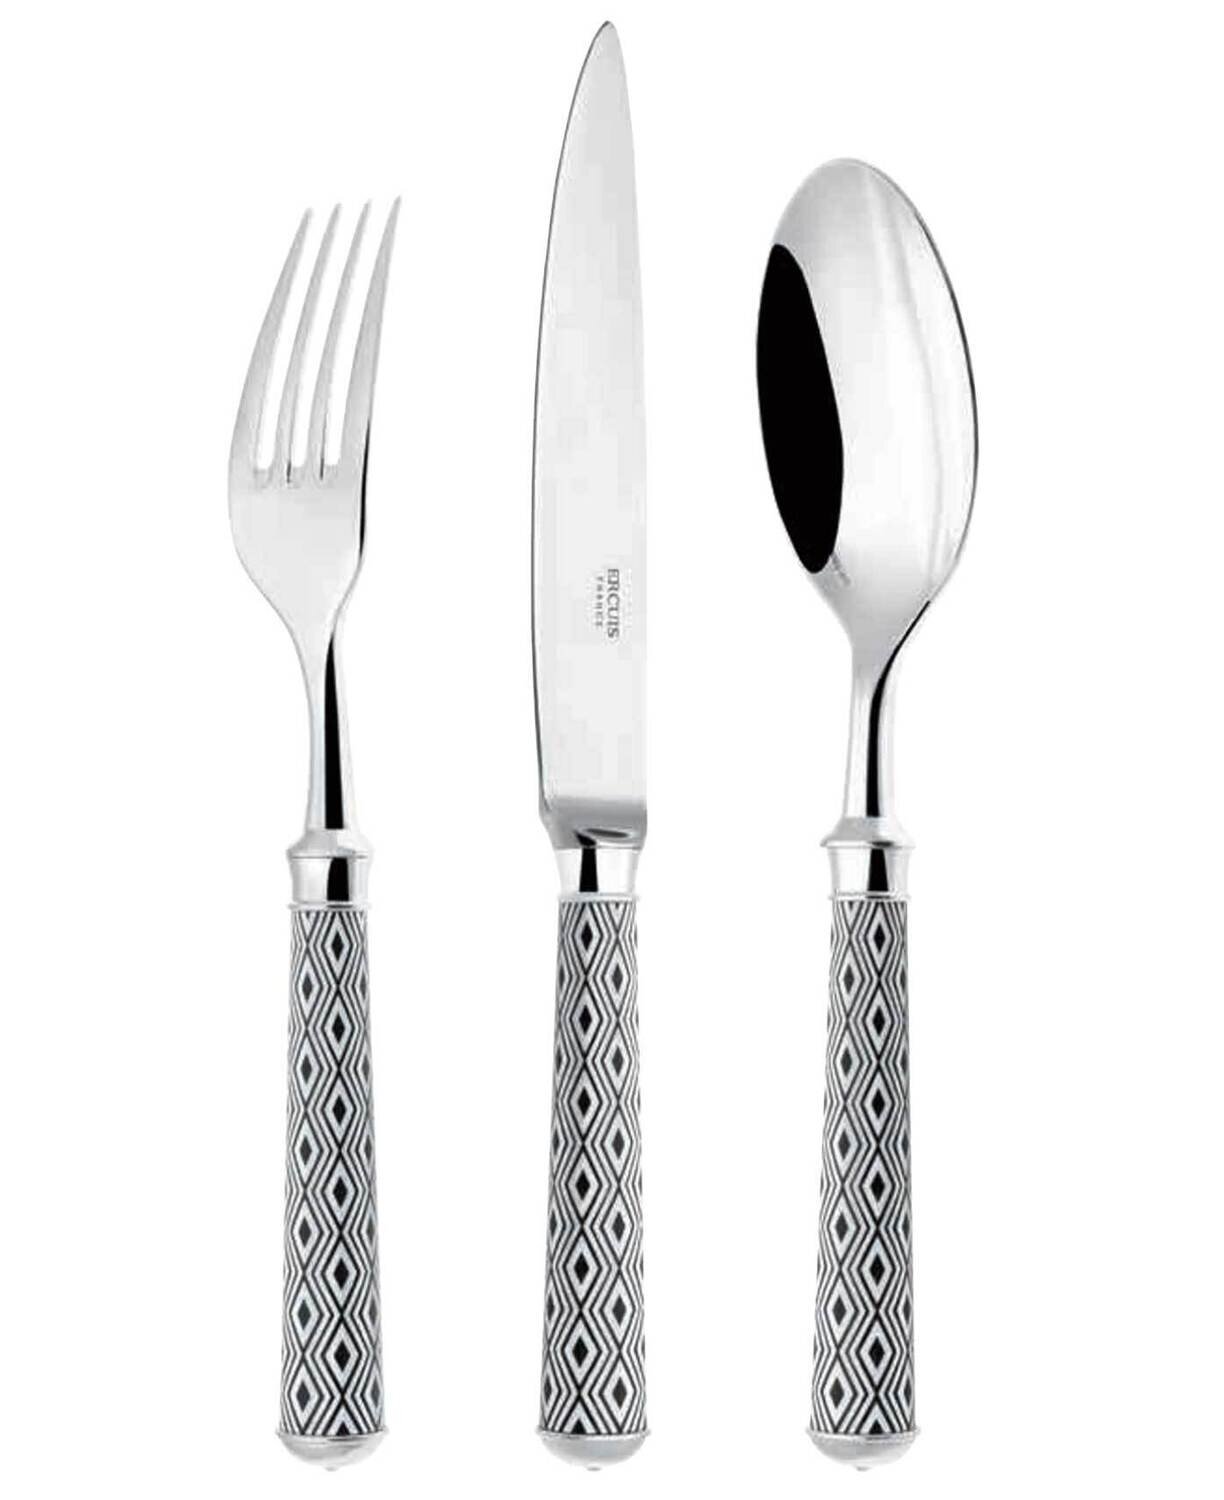 Ercuis Arlequin Brown Grey Fish Fork 7.625 Inch Silver Plated F600546-07